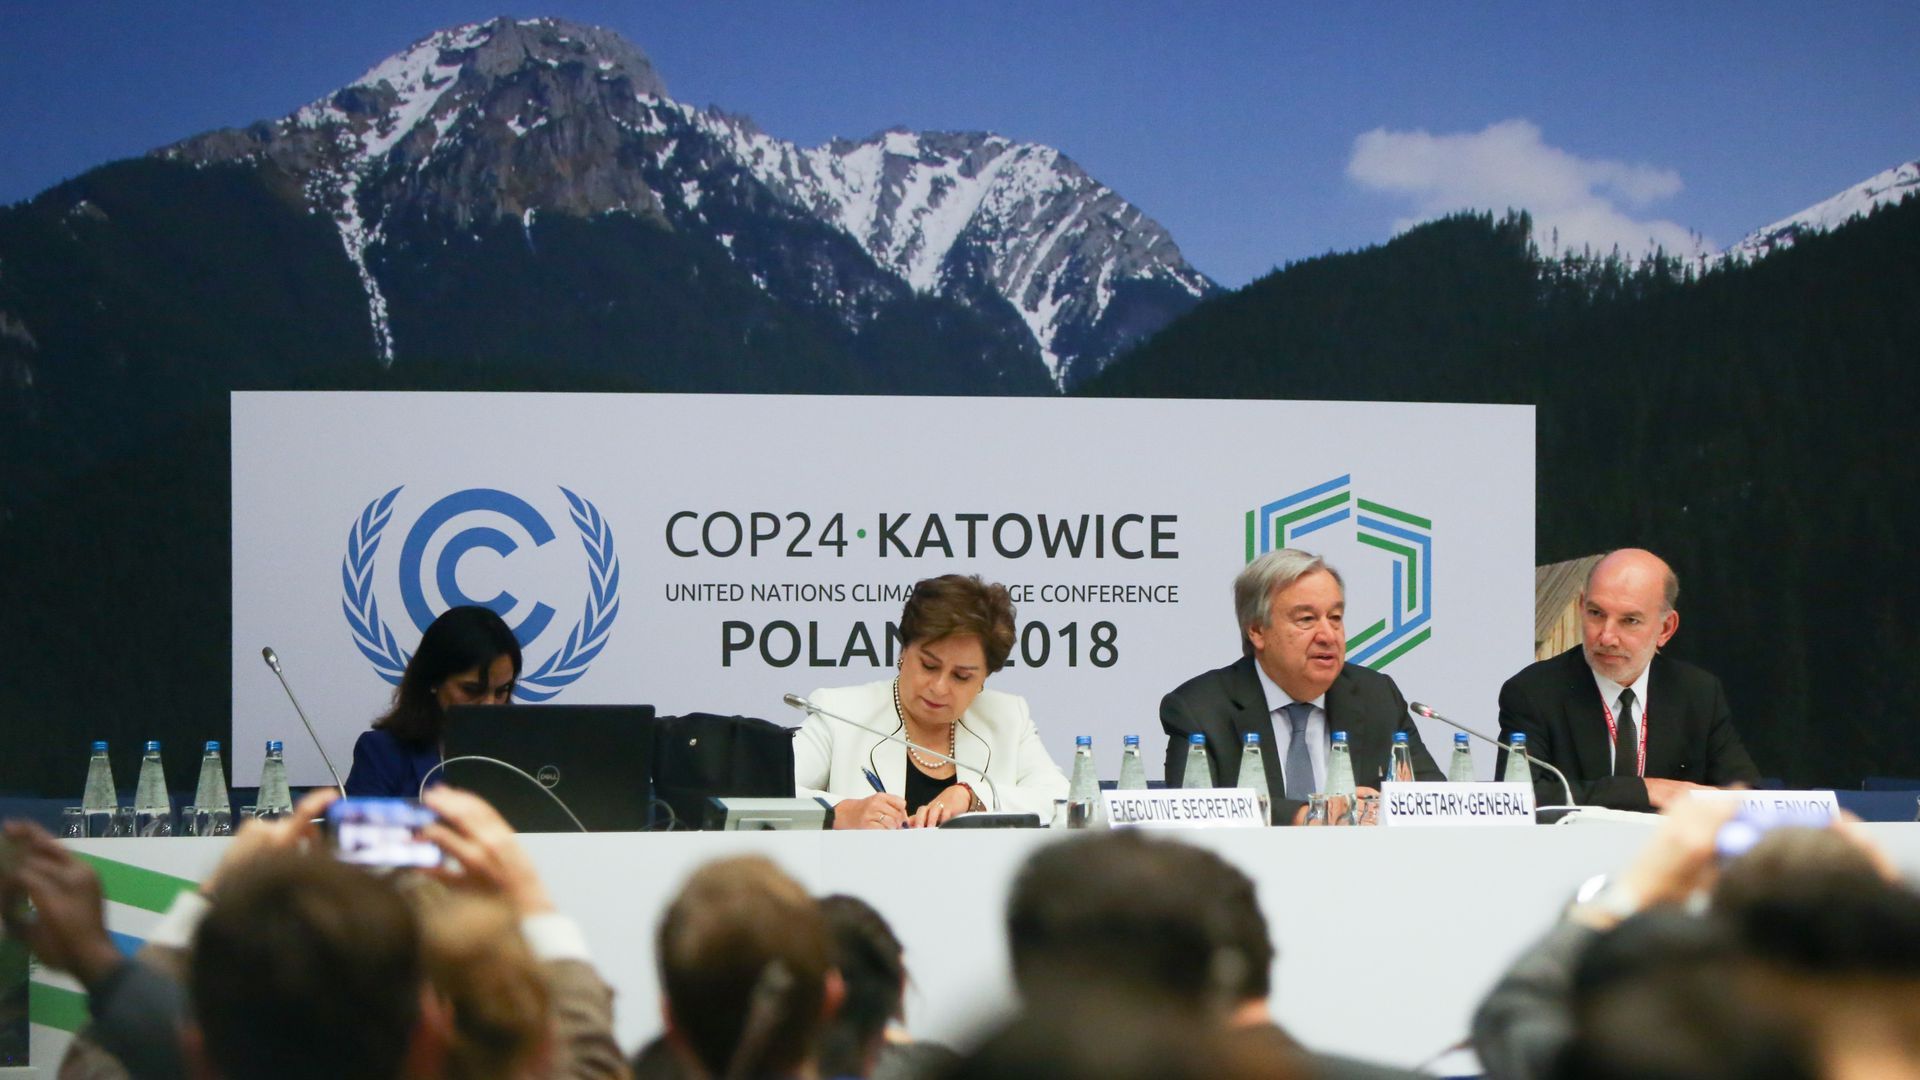 Photo of panel at 2018 UN climate conference in Katowice, Poland.